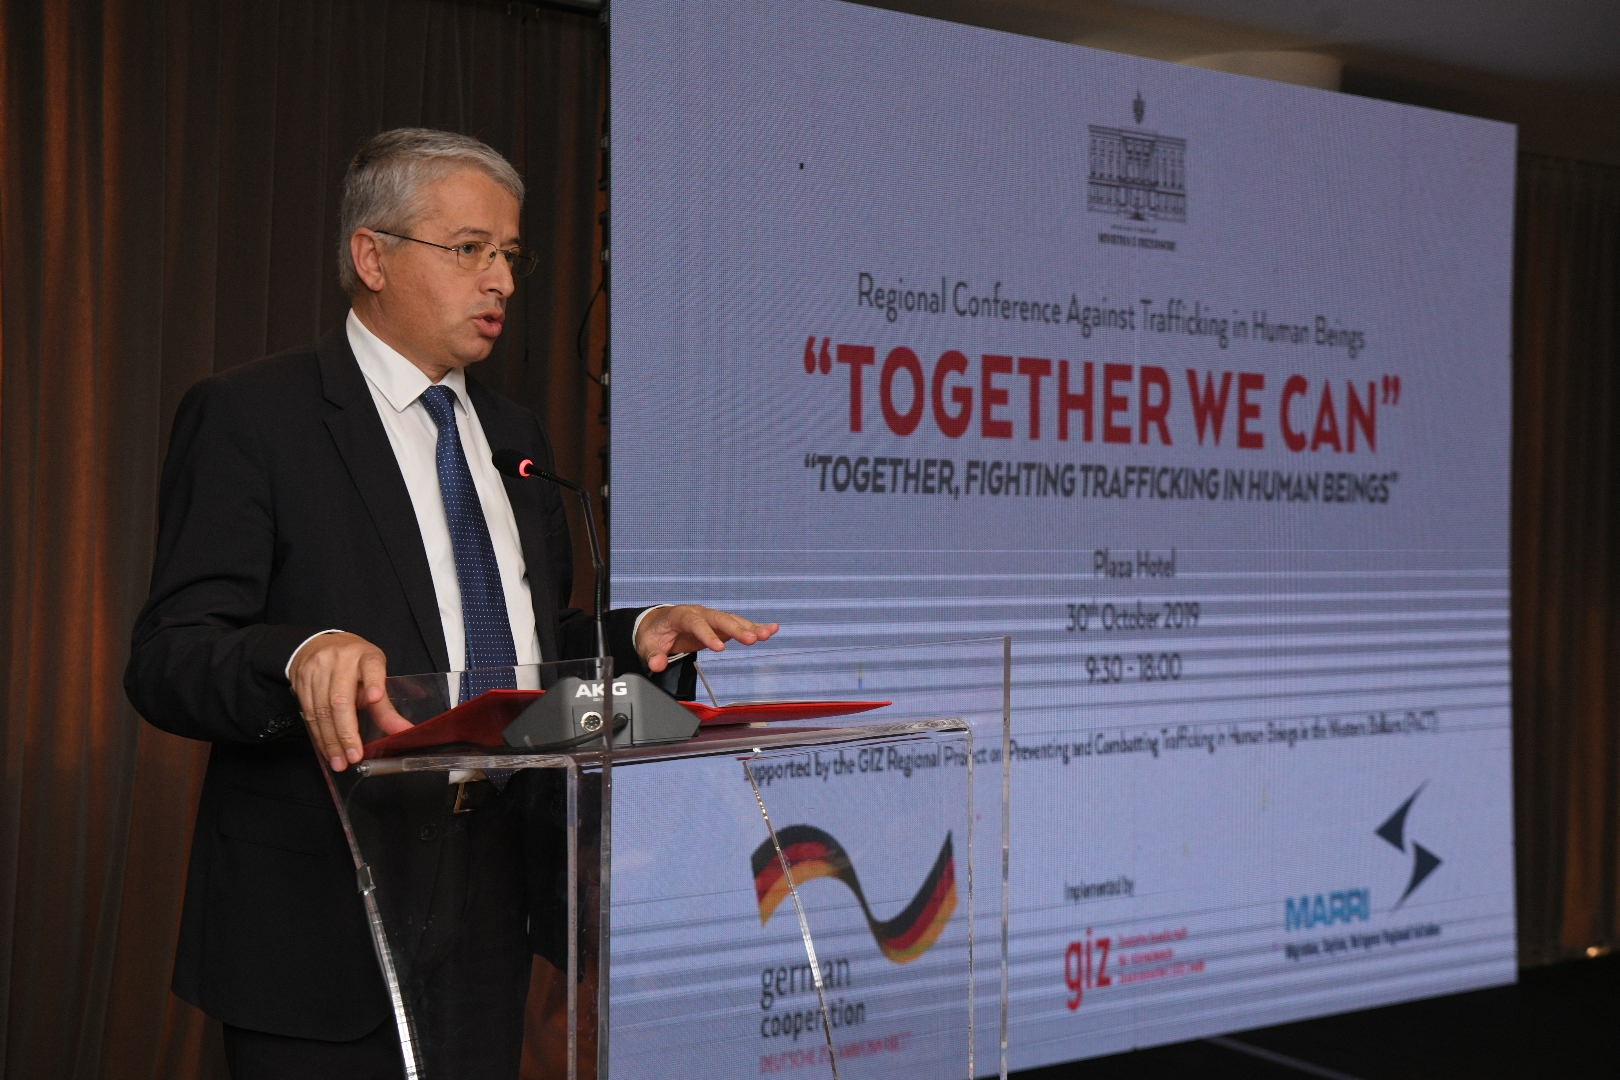 30 October 2019 – Regional Conference Against Trafficking in Human Beings – “Together we can – Together, fighting Trafficking in Human Beings”